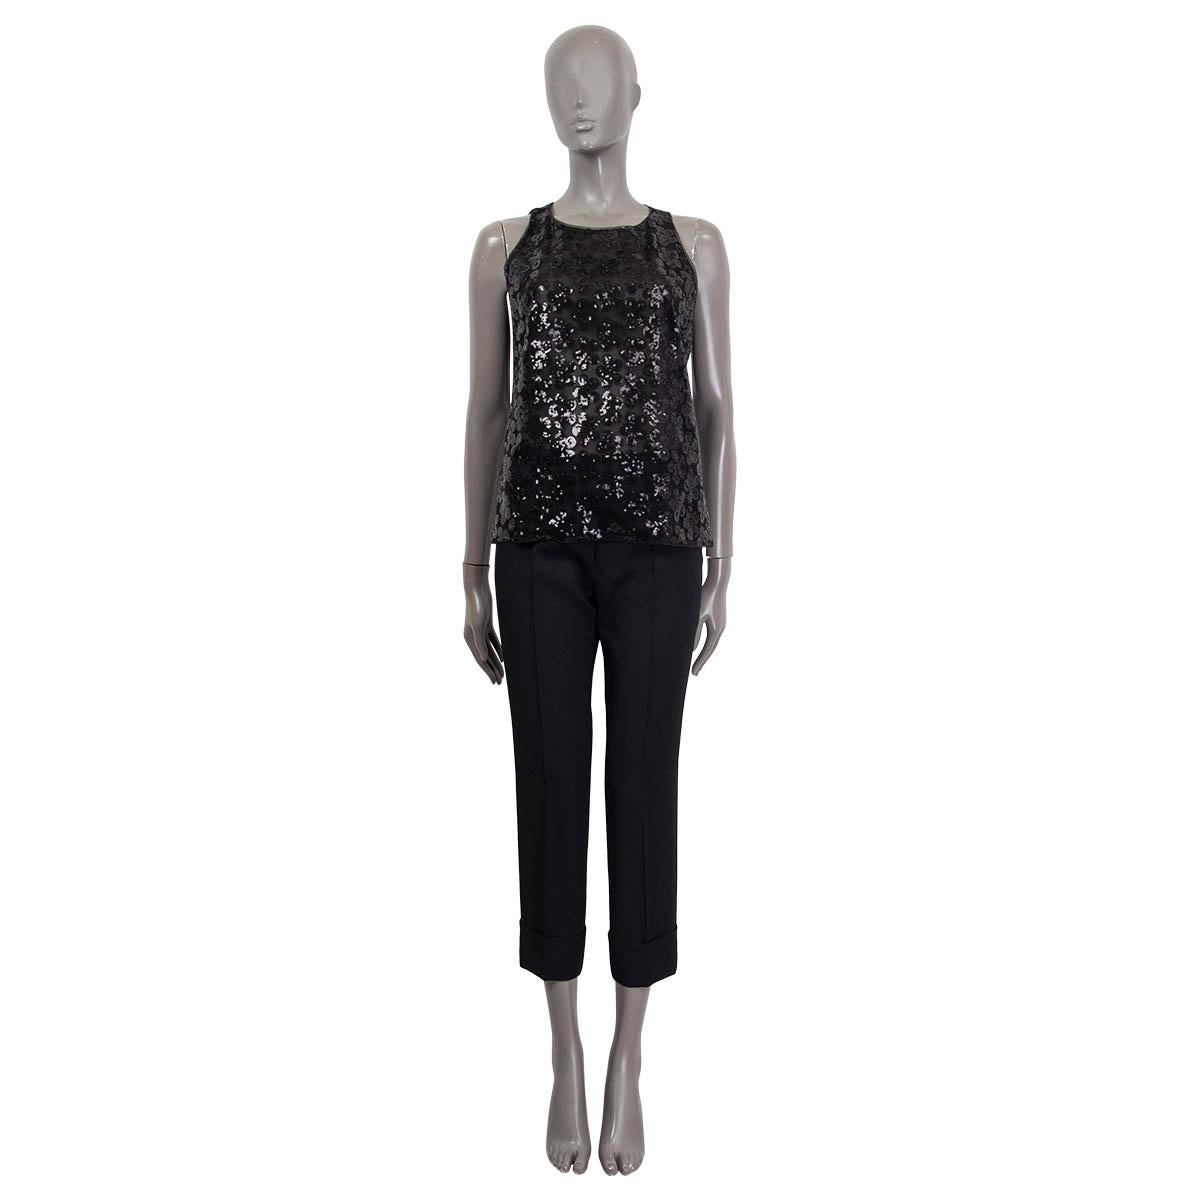 100% authentic Chanel 2015 floral sequin embellished sleeveless shirt in black polyester (100%). Opens with a concealed zipper and a hook at the back. Lined in black silk (100%). Has been worn and is in excellent condition.

Measurements
Tag